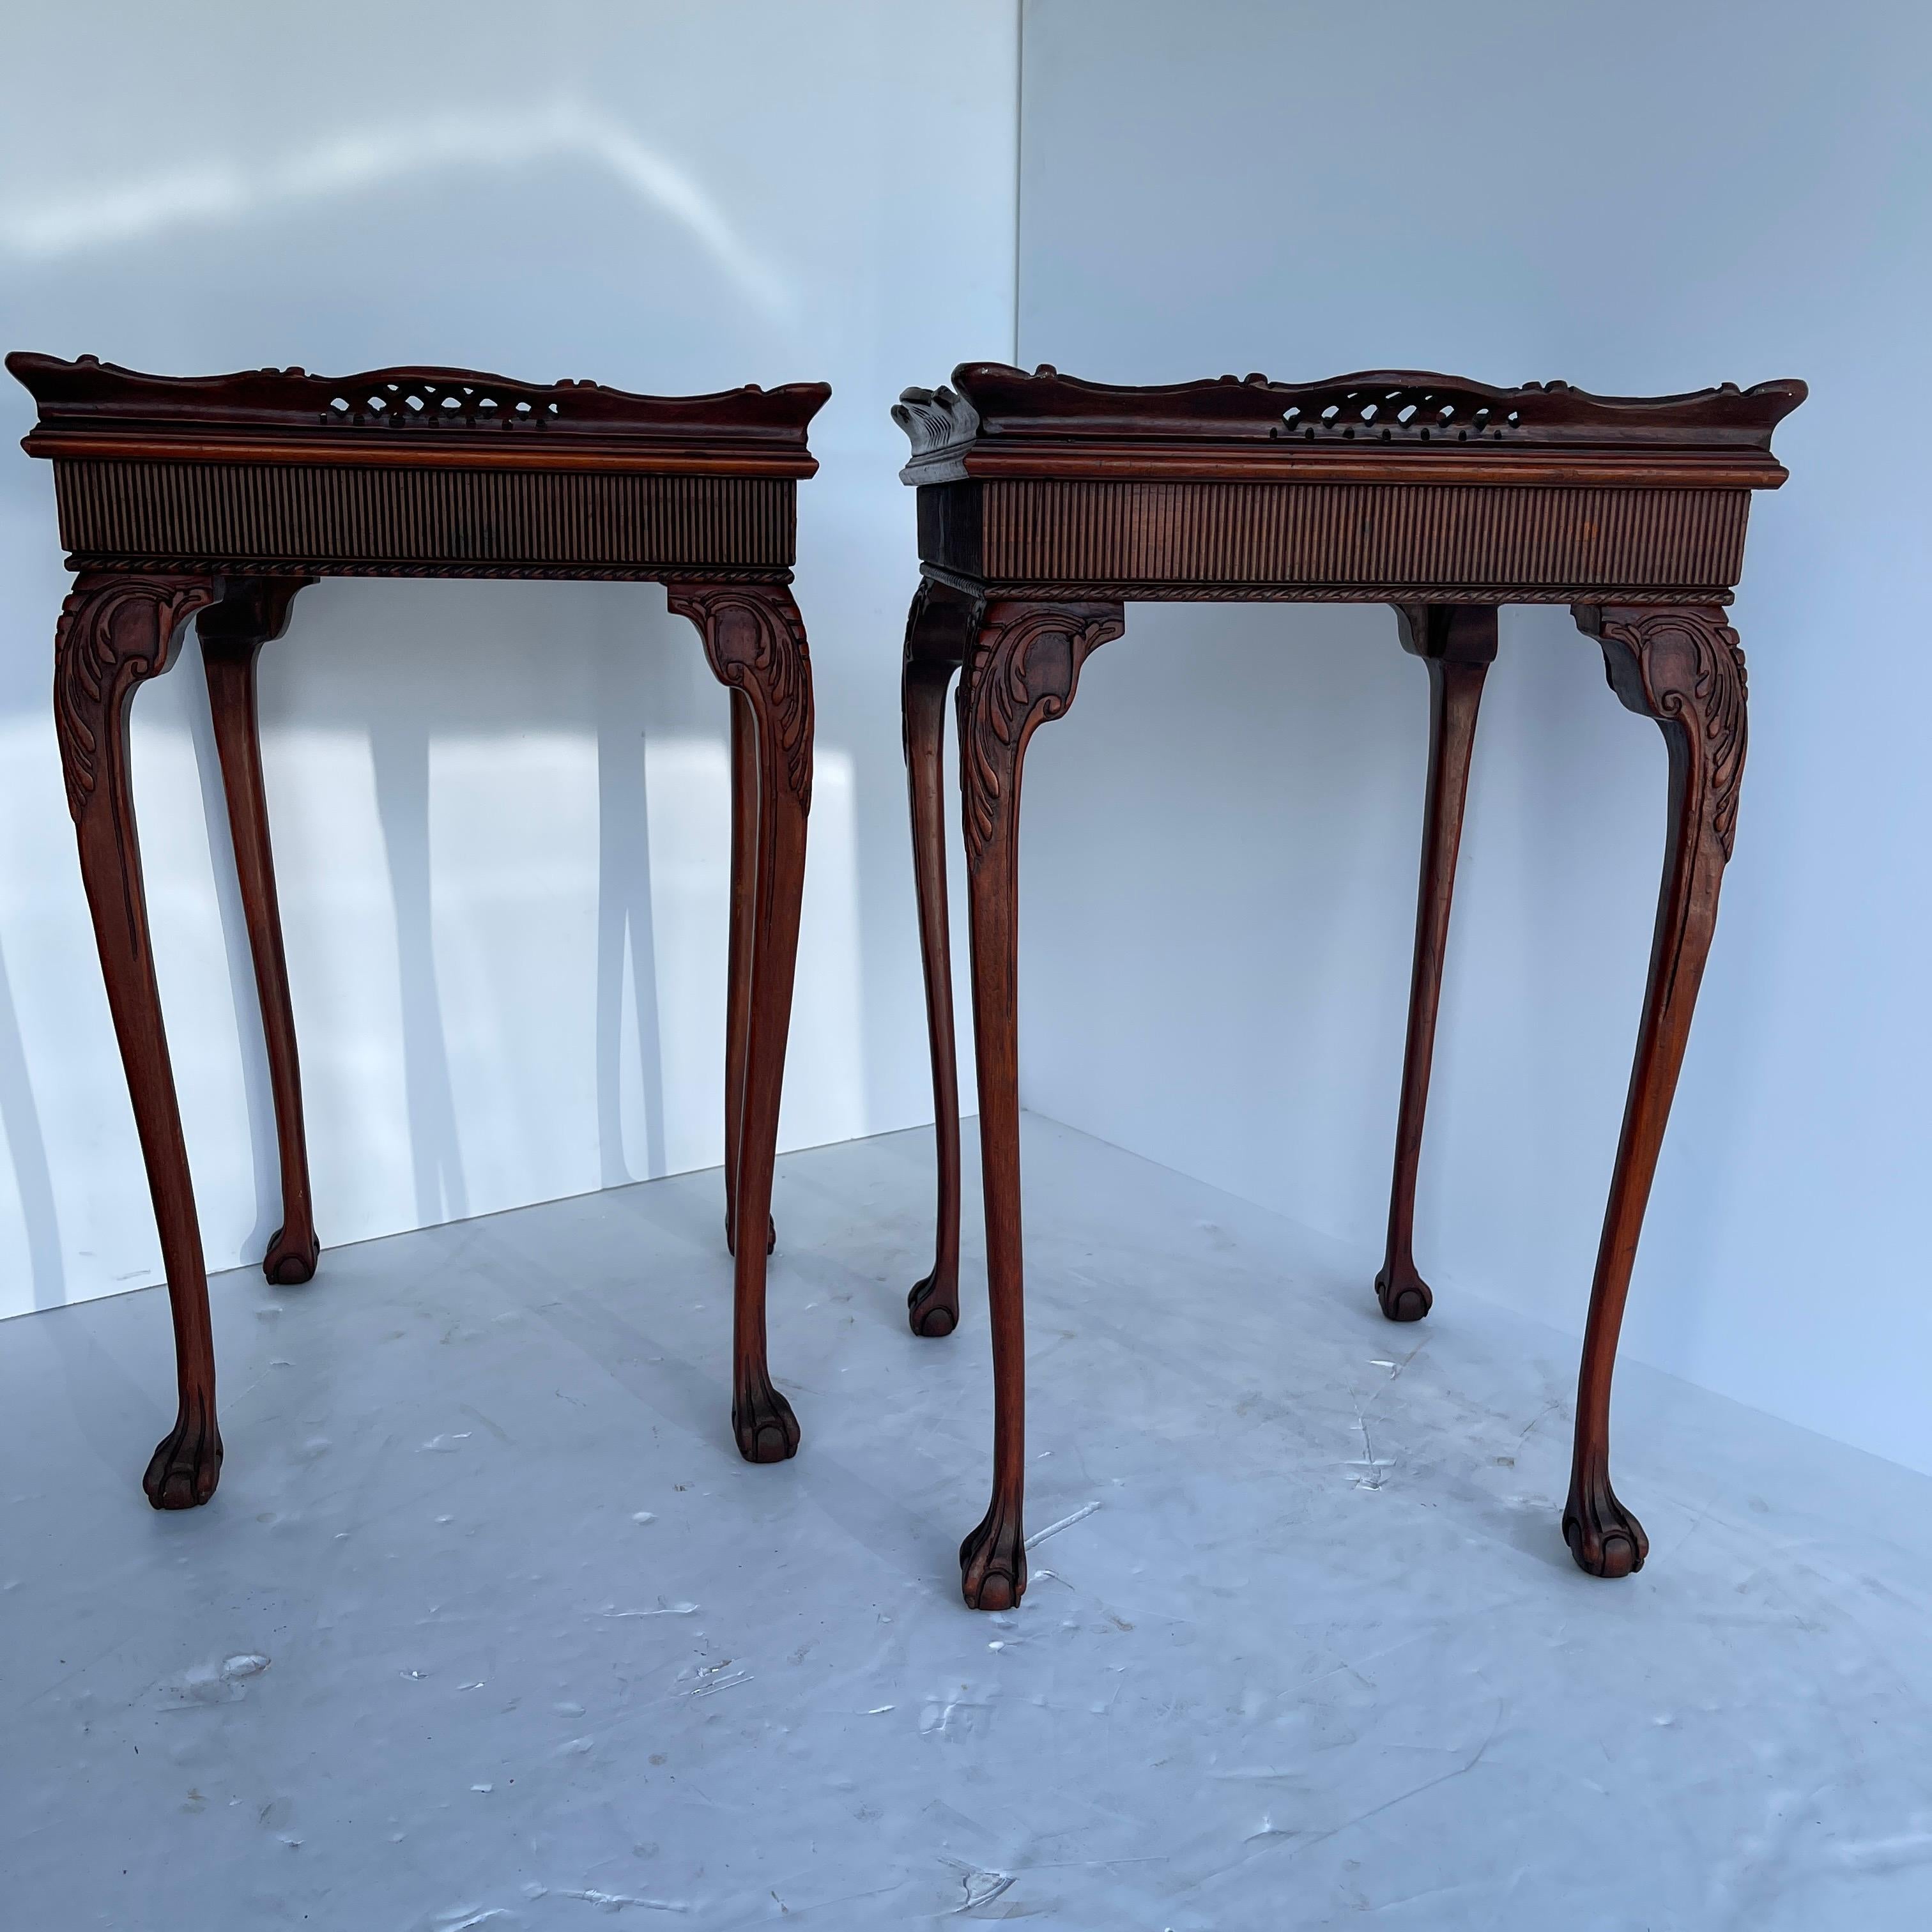 Two late 19th century Chinese Chippendale side tables. This ornately carved pair of tables are graceful with long curved legs and ball and claw carved feet. Beautifully restored, the mahogany wood has a warm rich glow. The carved sides along the top